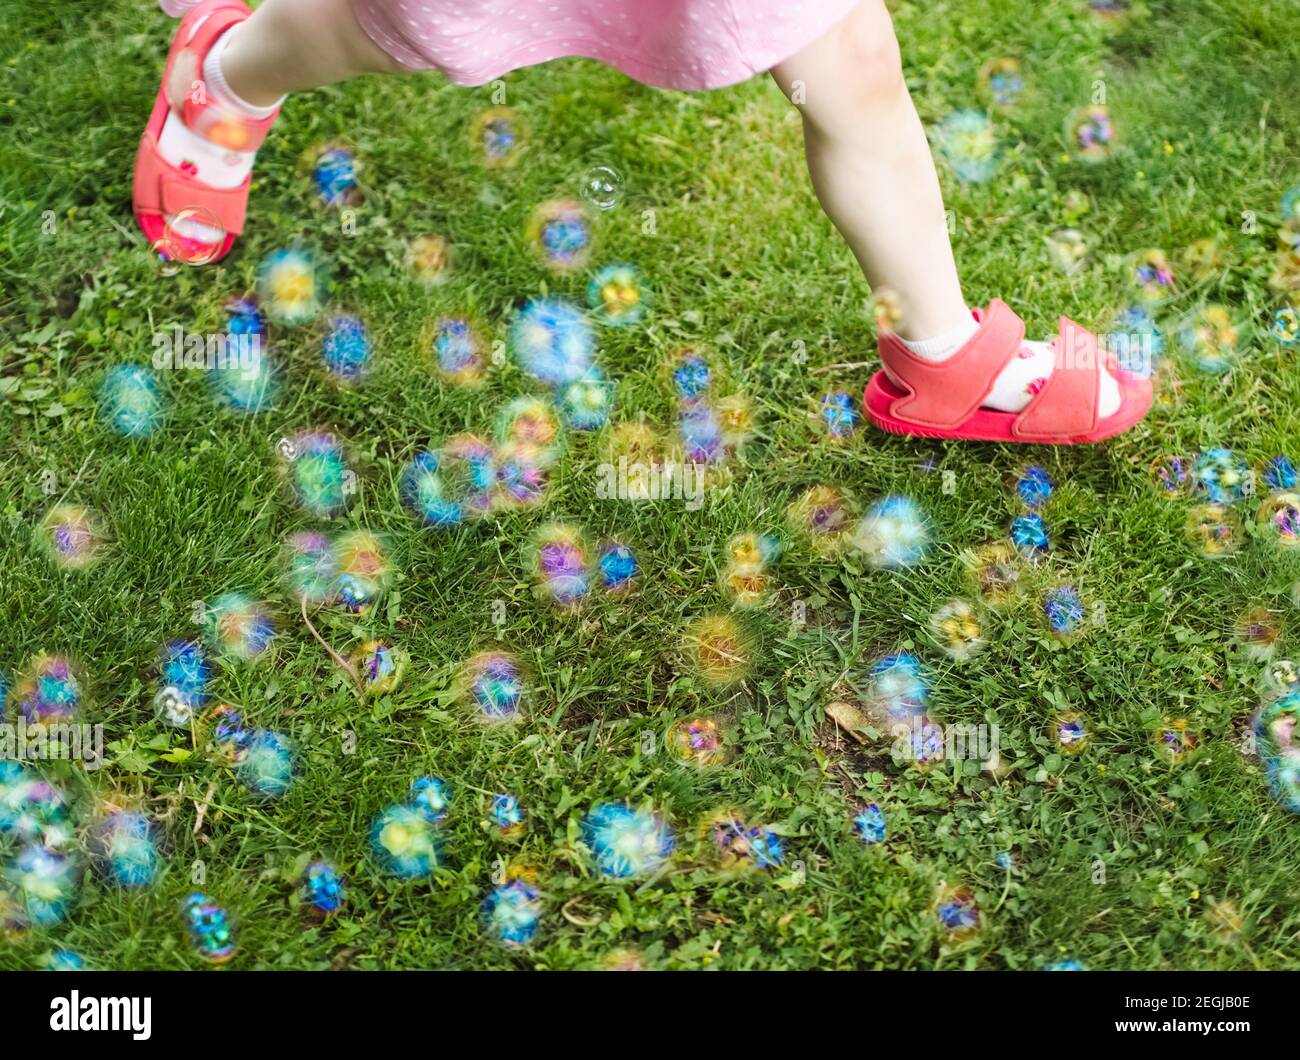 Little Girl in Pink Dress Running Through Soap Bubbles in the Yard Stock Photo